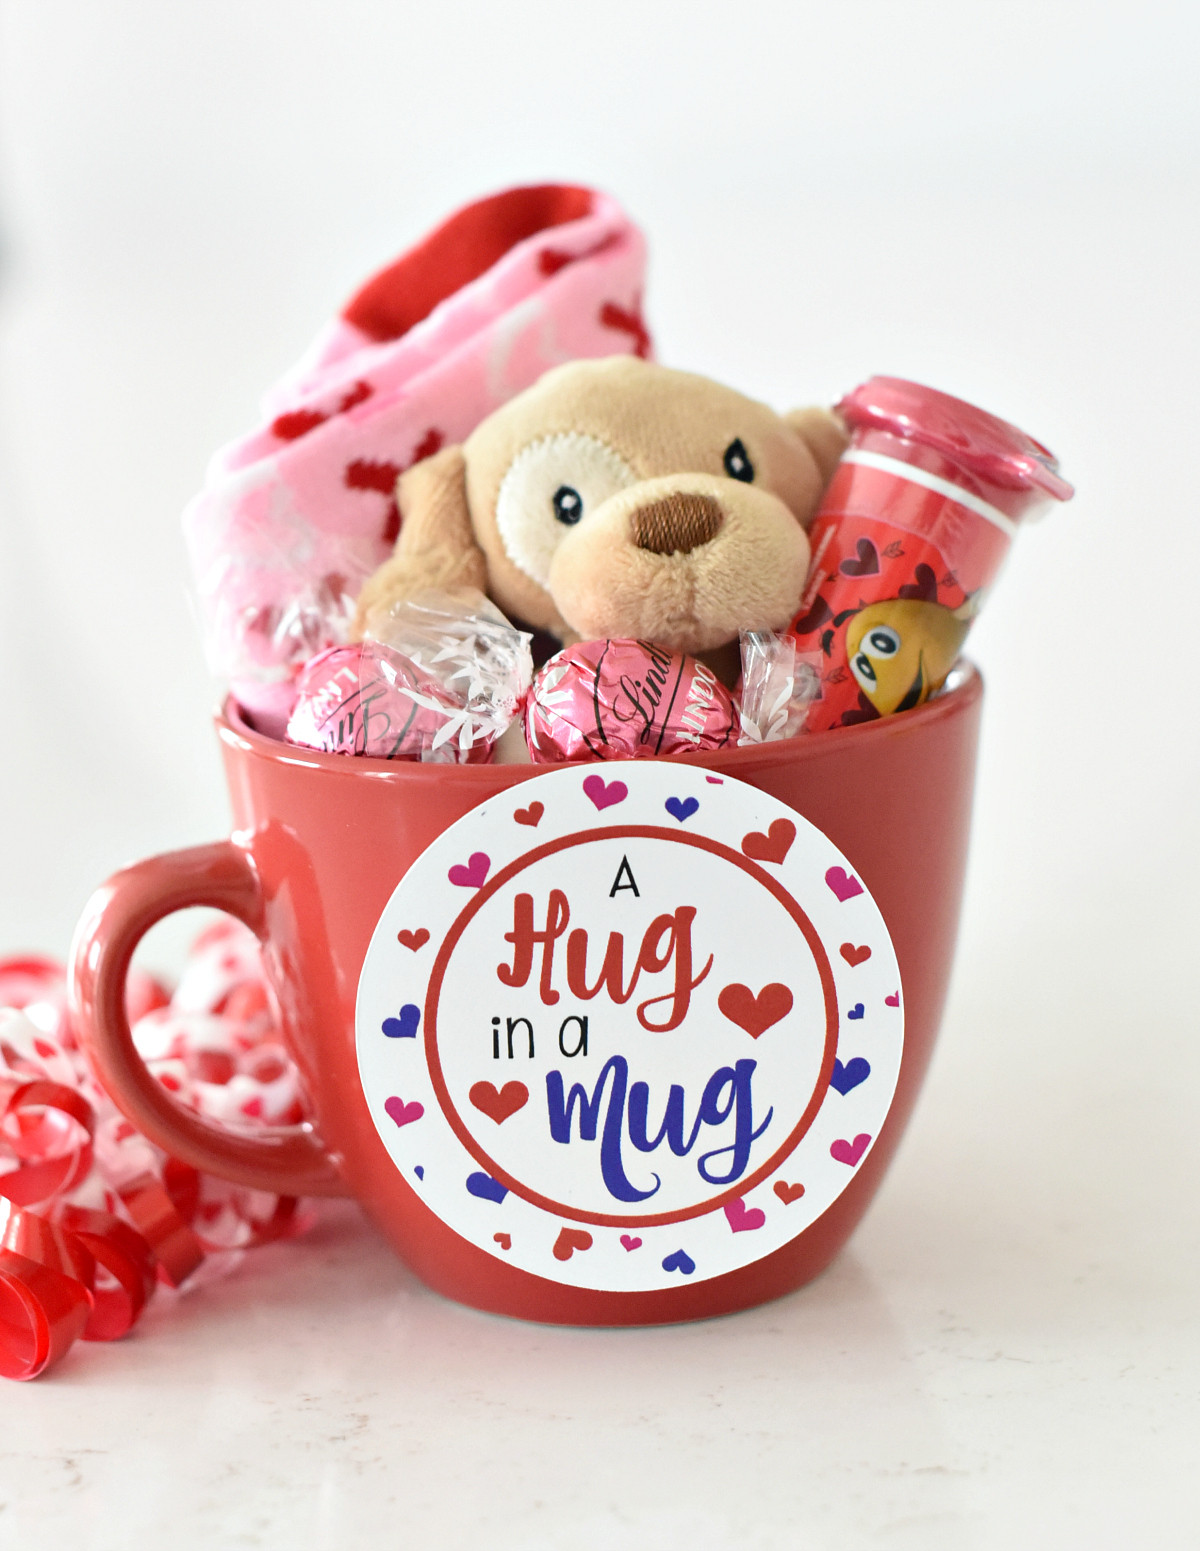 Cute Valentines Gift Ideas
 Cute Valentine s Day Gift Idea RED iculous Basket